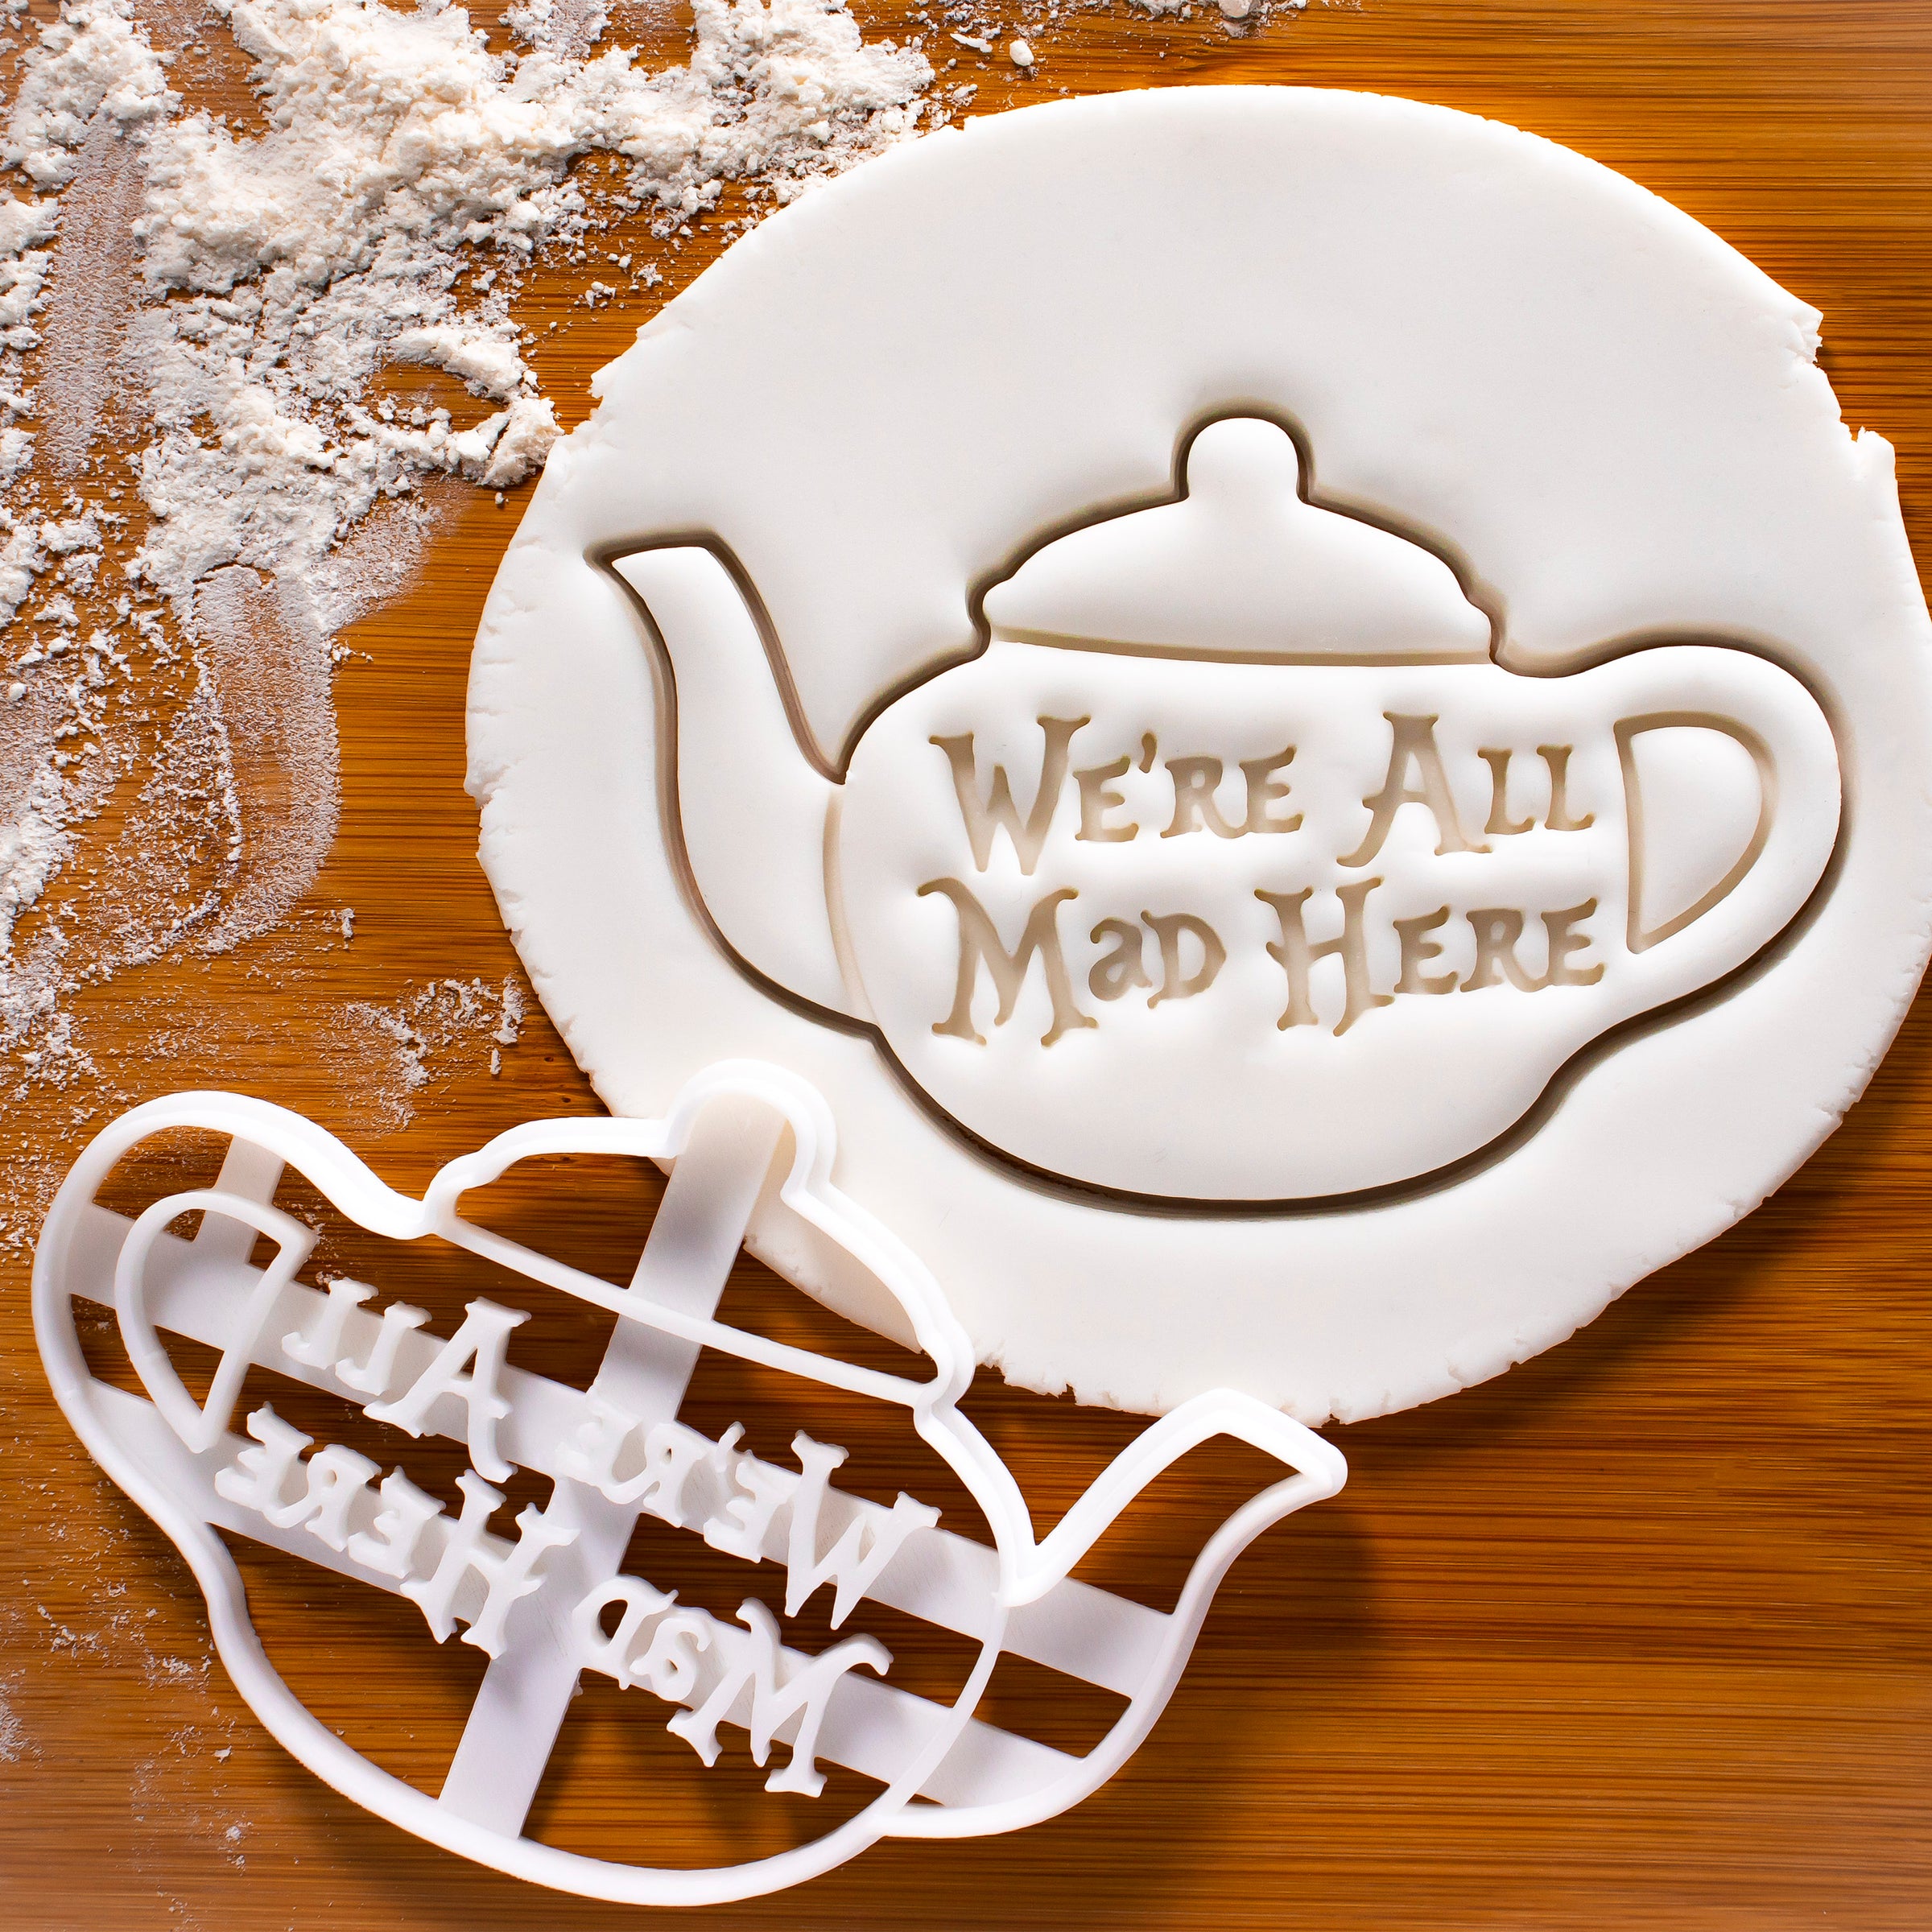  Handra 50pcs Drink Me Tags Alice in Wonderland Drink Me Tags,  Open Me, Take Me, Eat Me, Mad Hatter Tea Party Decorations (Eat Me) :  Health & Household